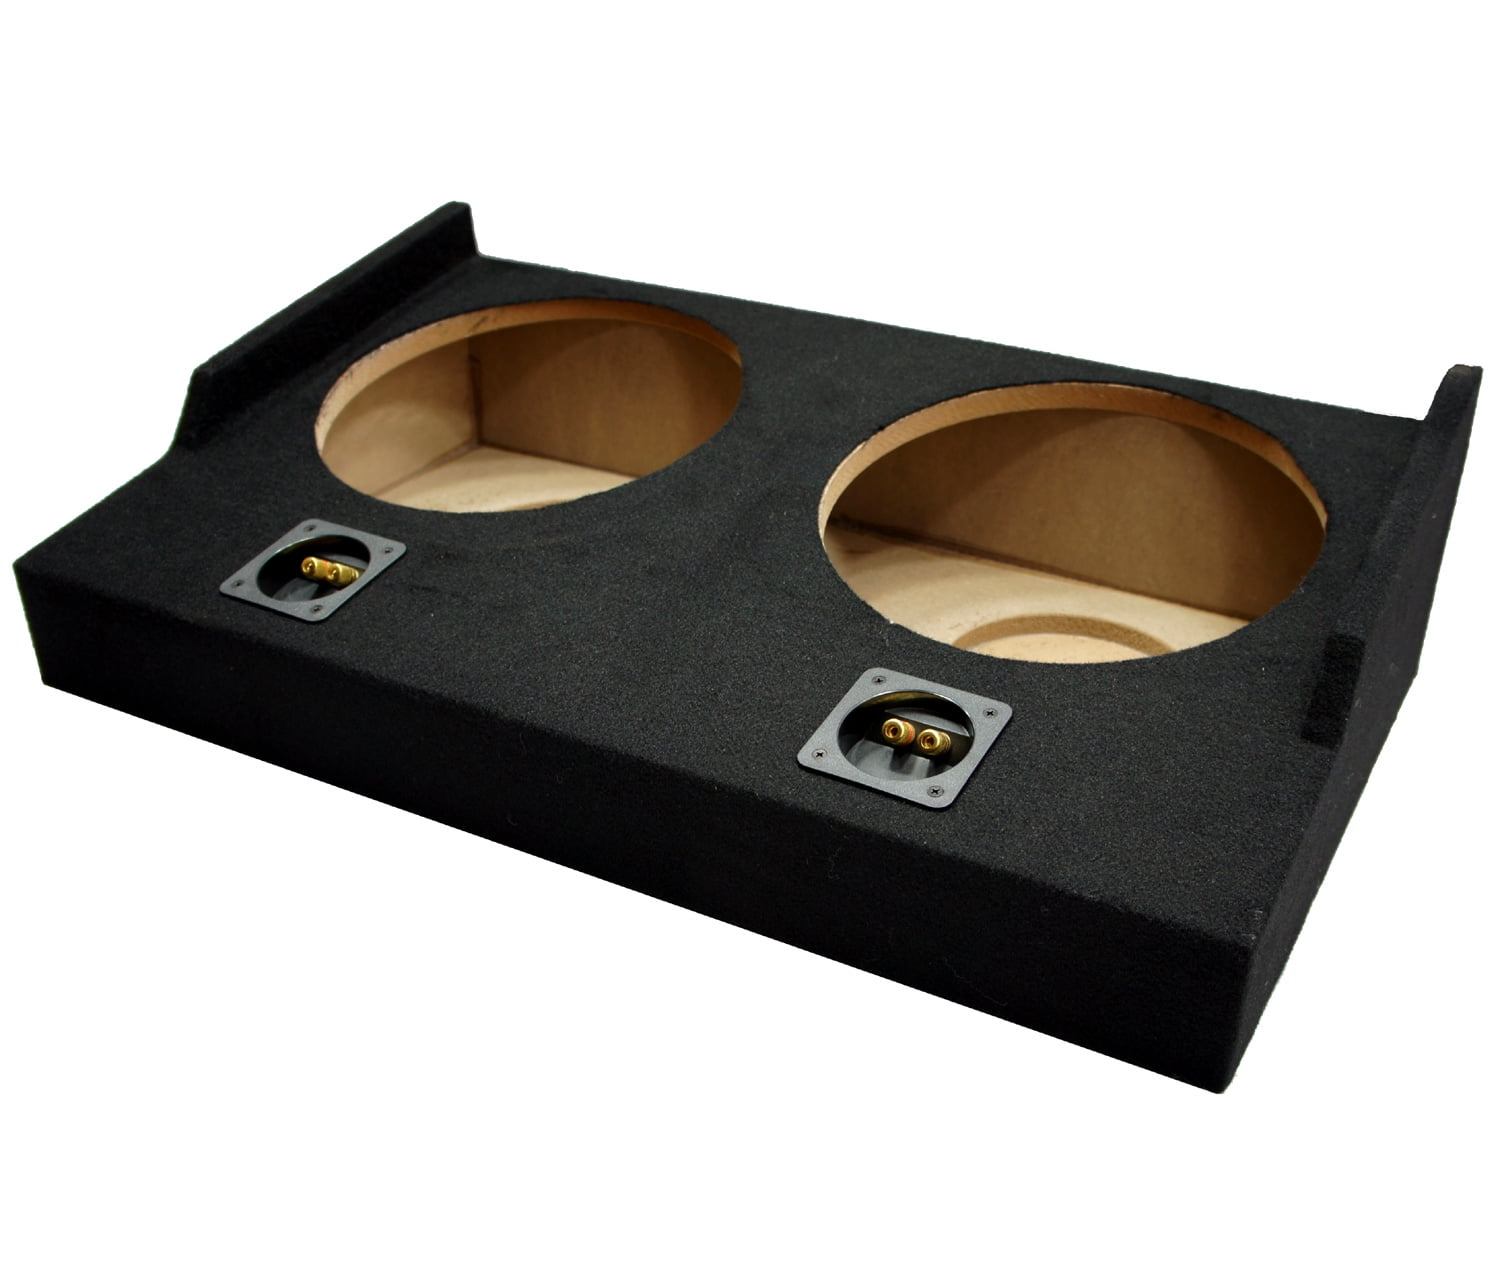 Kicker C12 Compatible with Ford F-150 Super Cab 2015-UP Bundled with HA-A800.1 Amplifier and Dual 12 Custom Sub Box Enclosure 